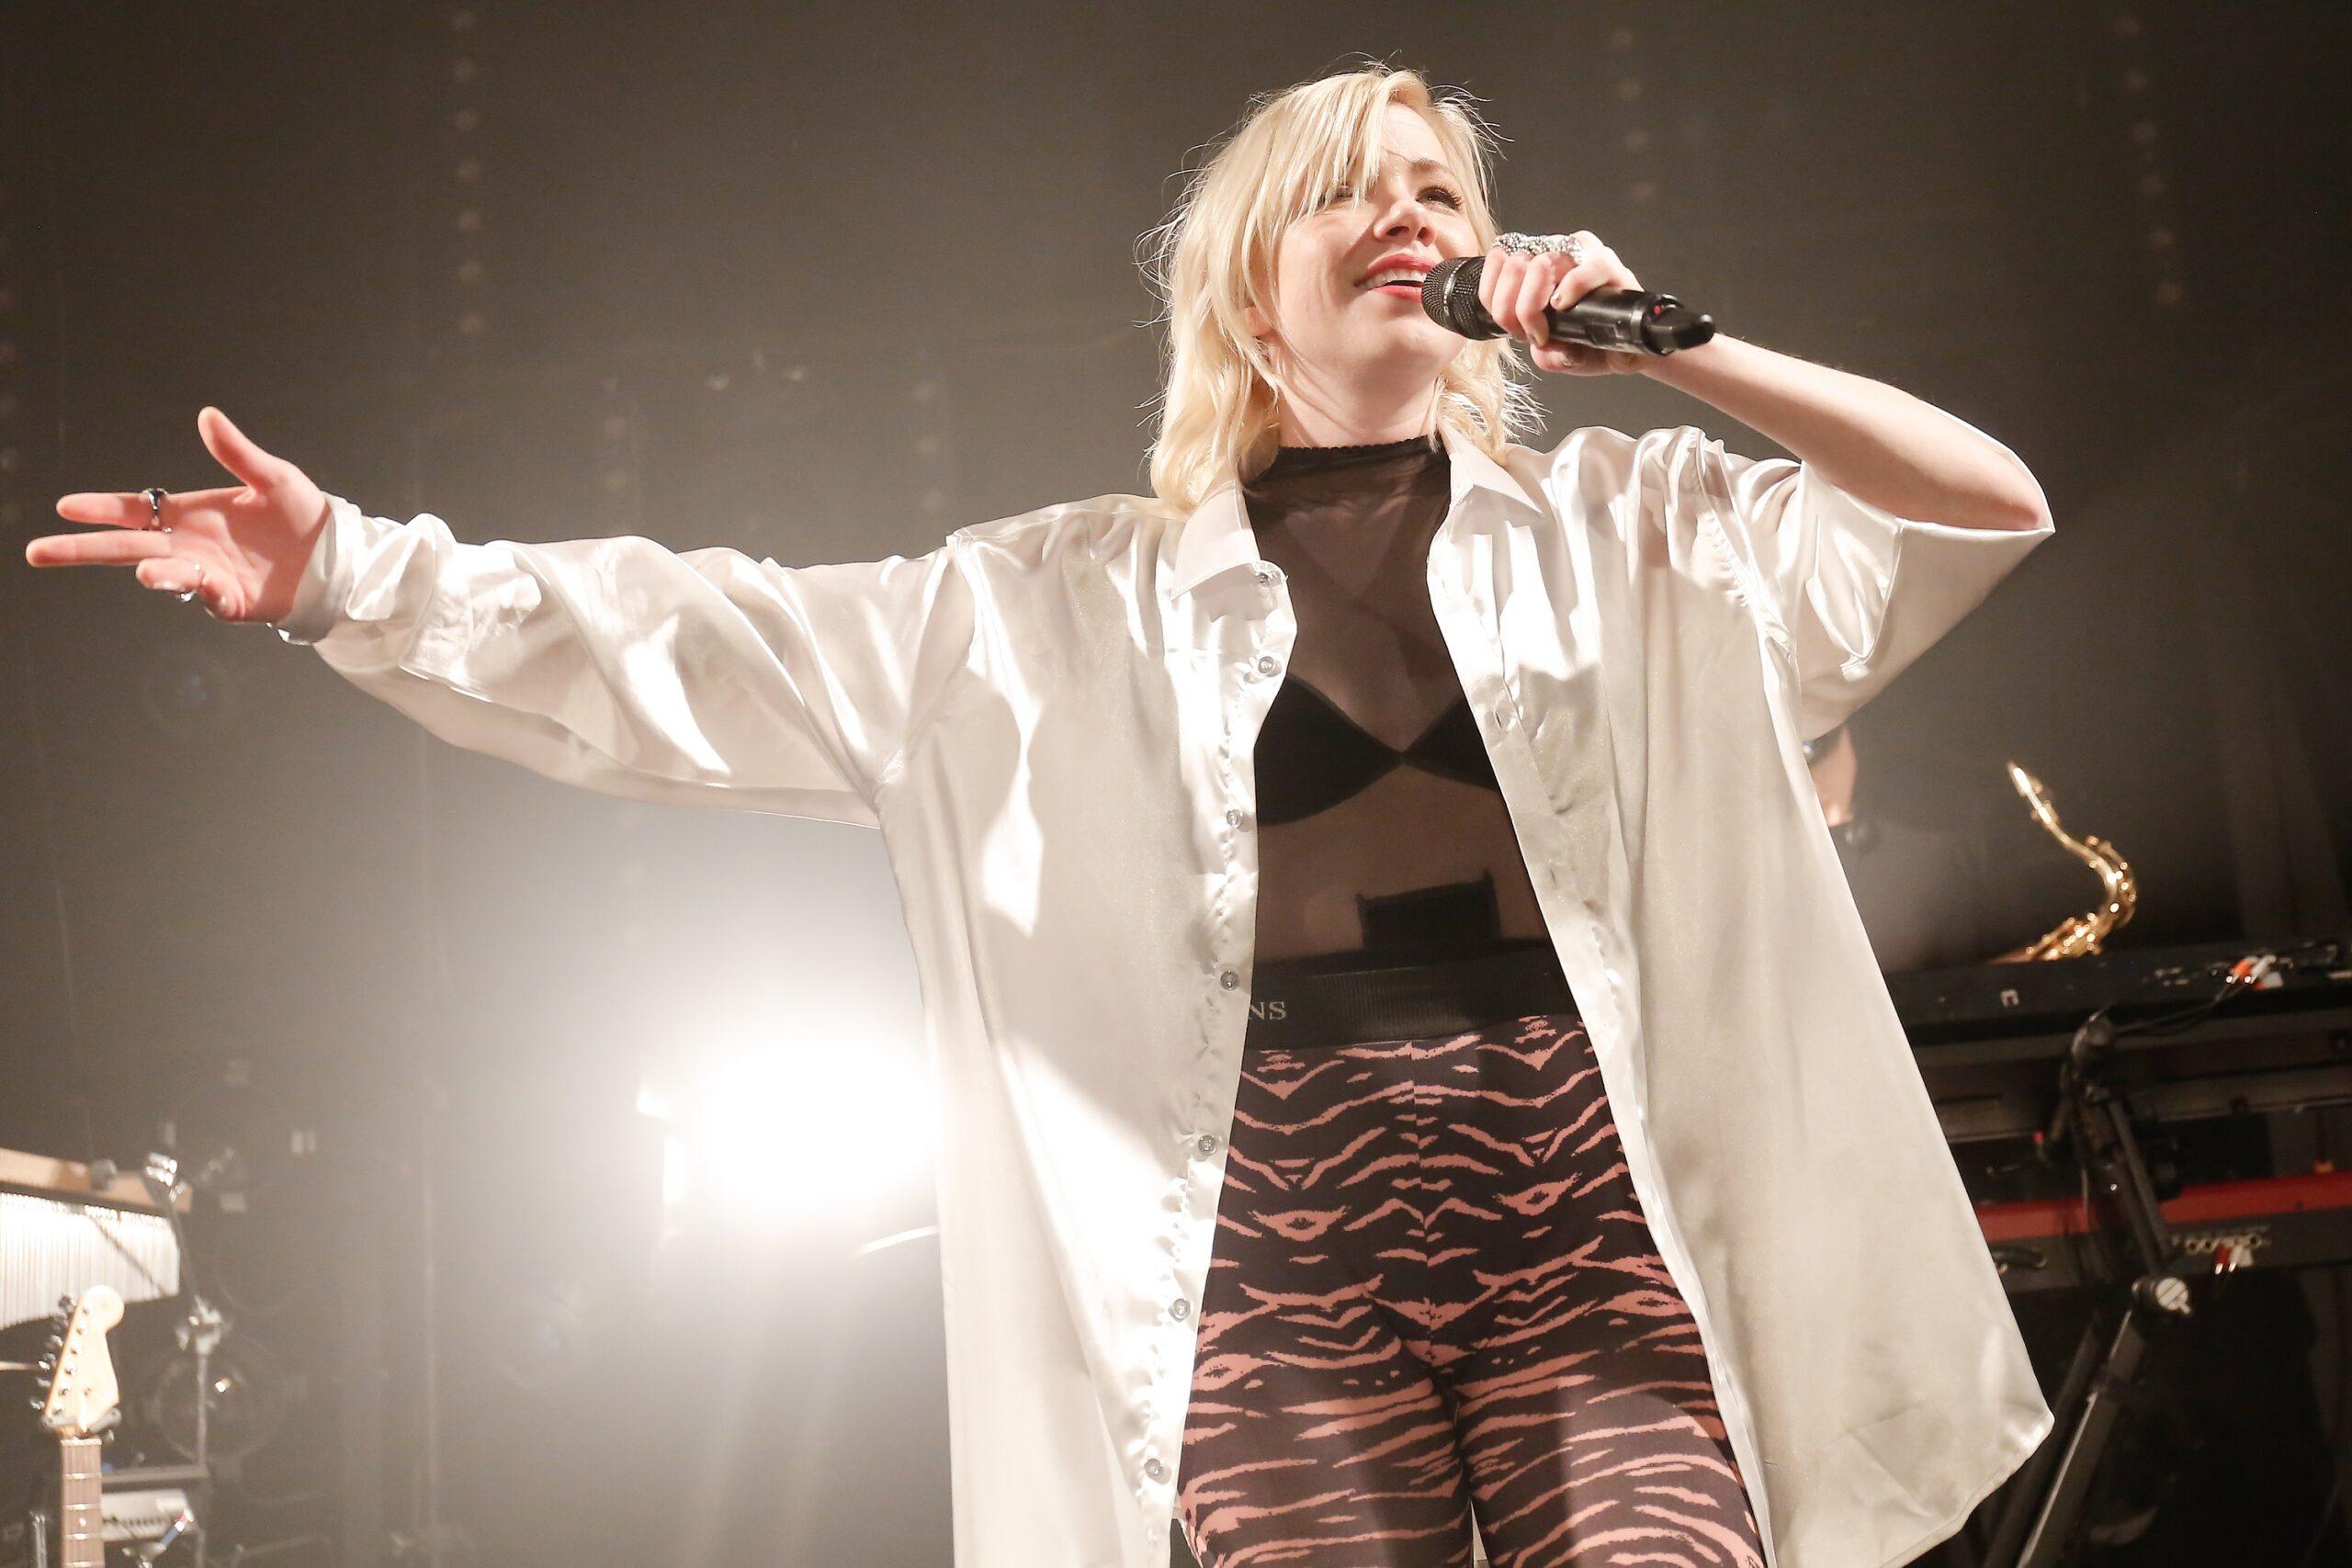 Carly Rae Jepsen performing at the Trabendo in Paris